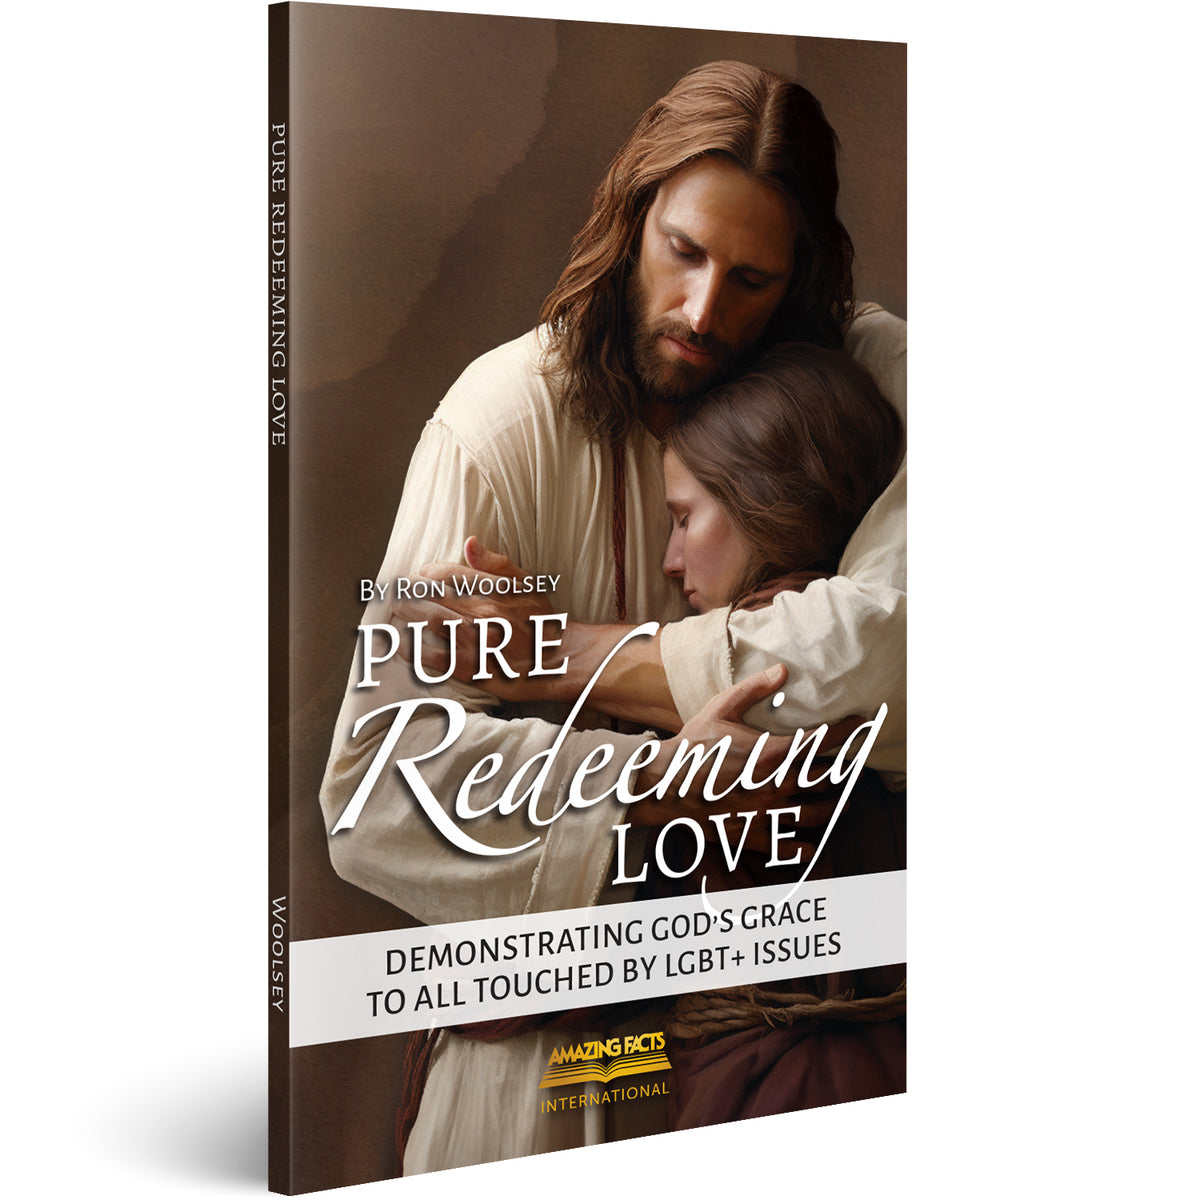 Pure Redeeming Love by Ron Woolsey